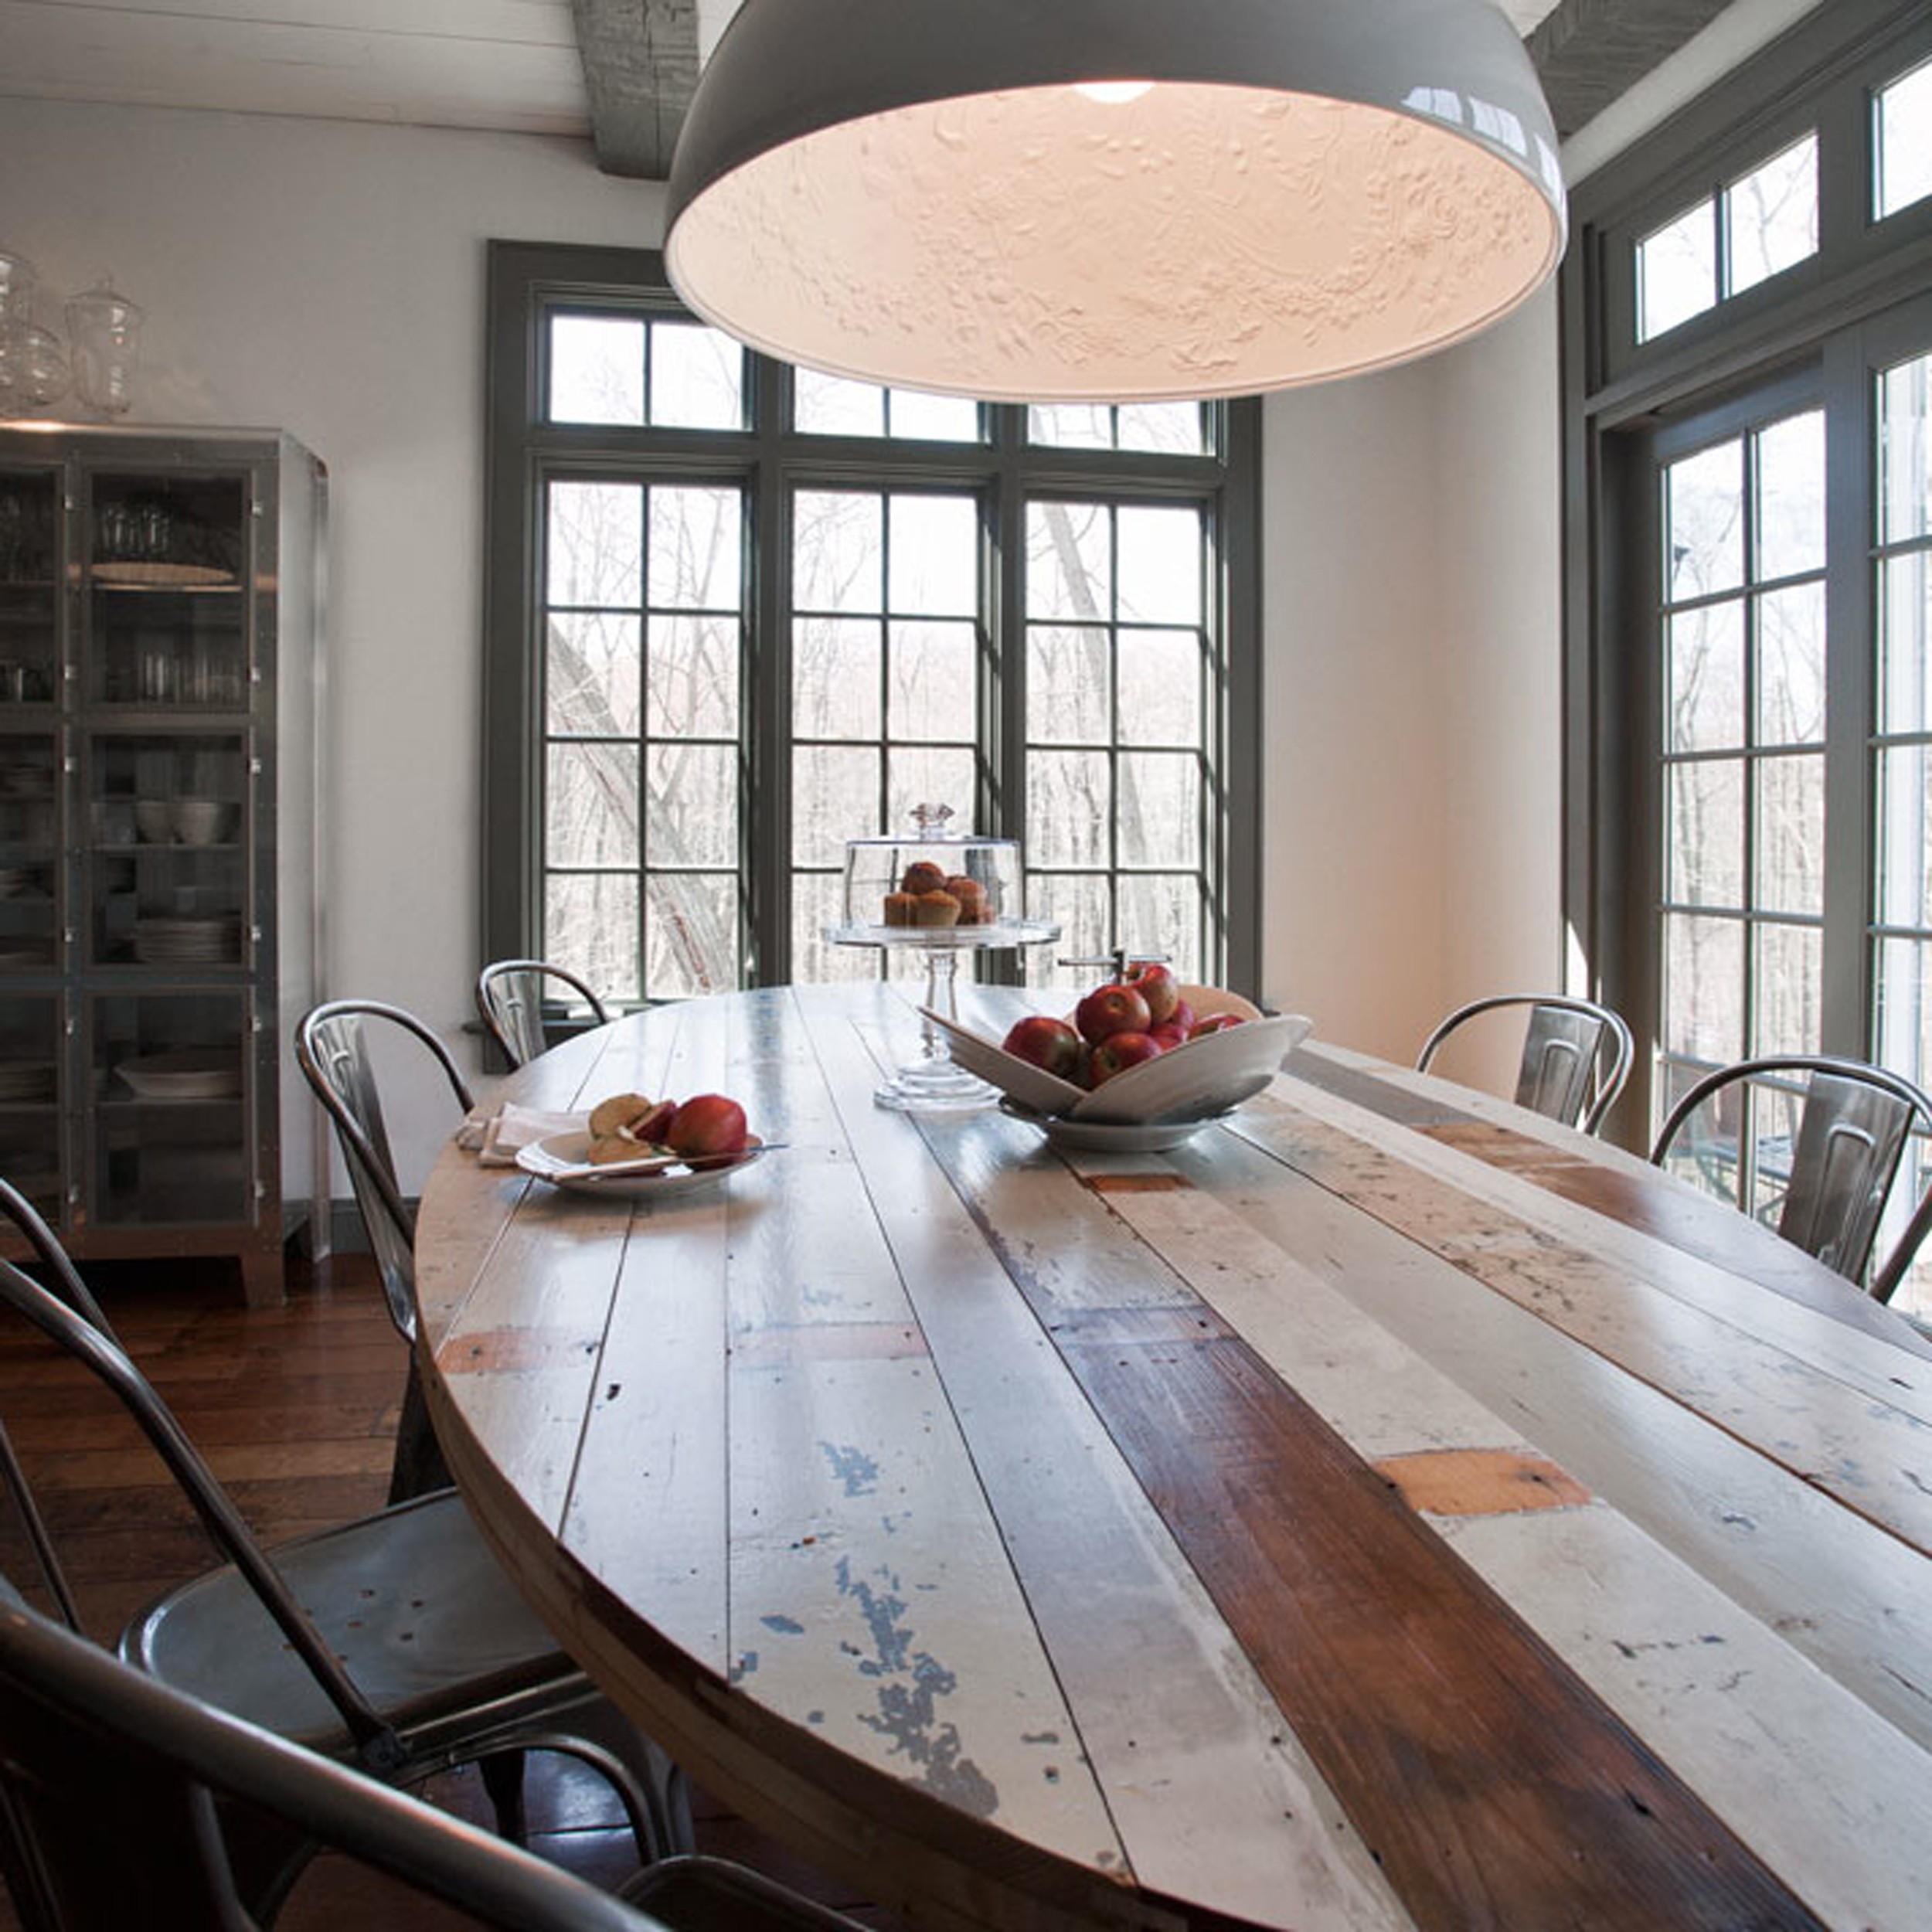 Cool recycled dining room table w industrial elements